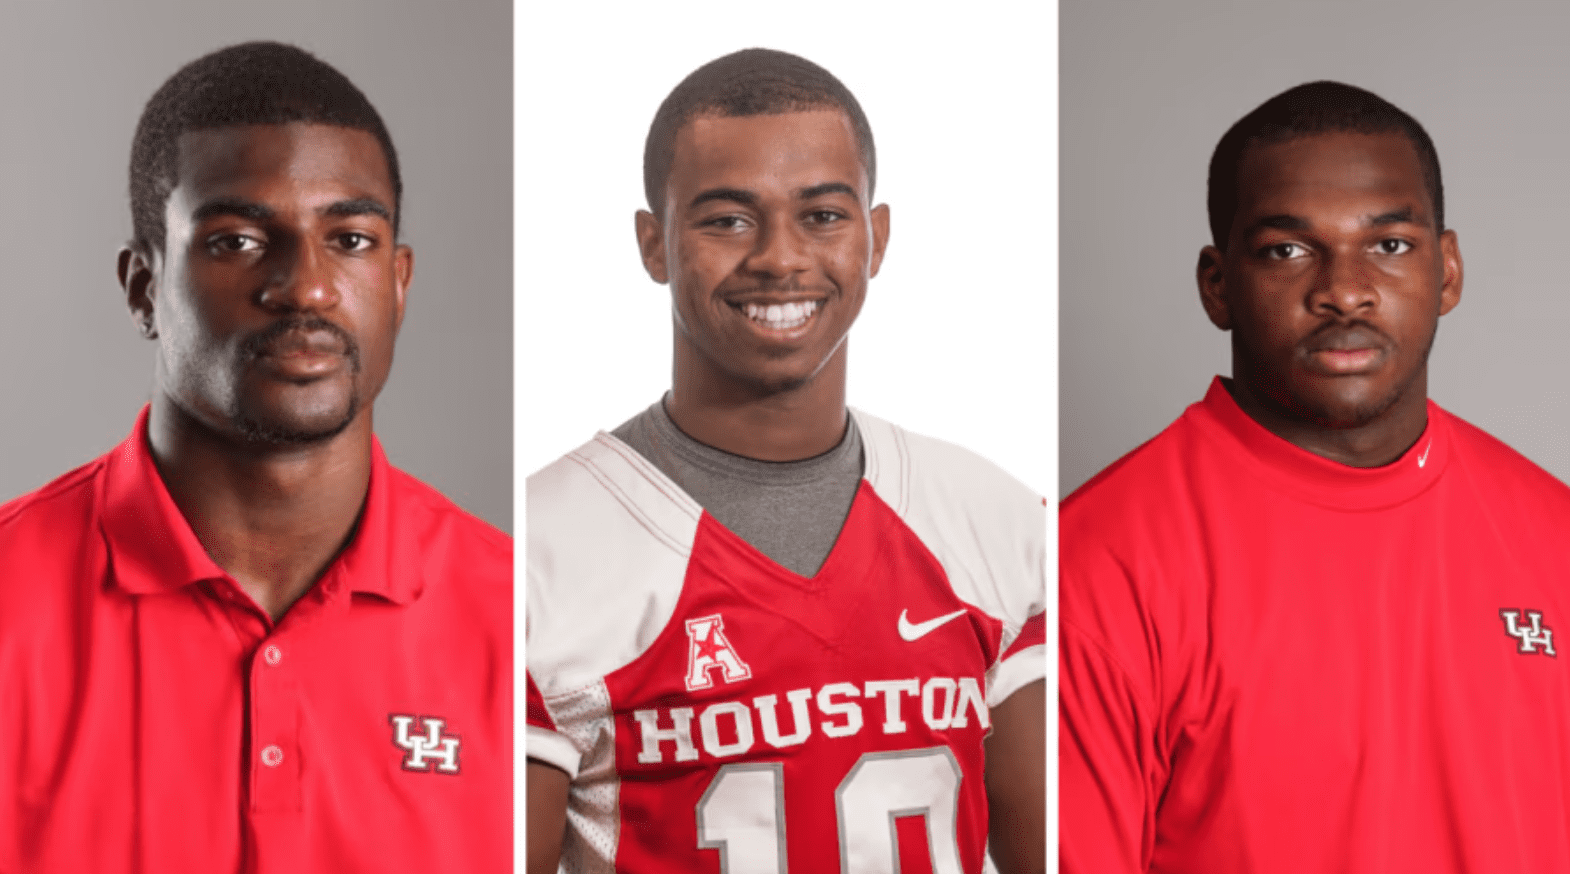 A woman critically injured in a crash that killed 3 former UH football players has died